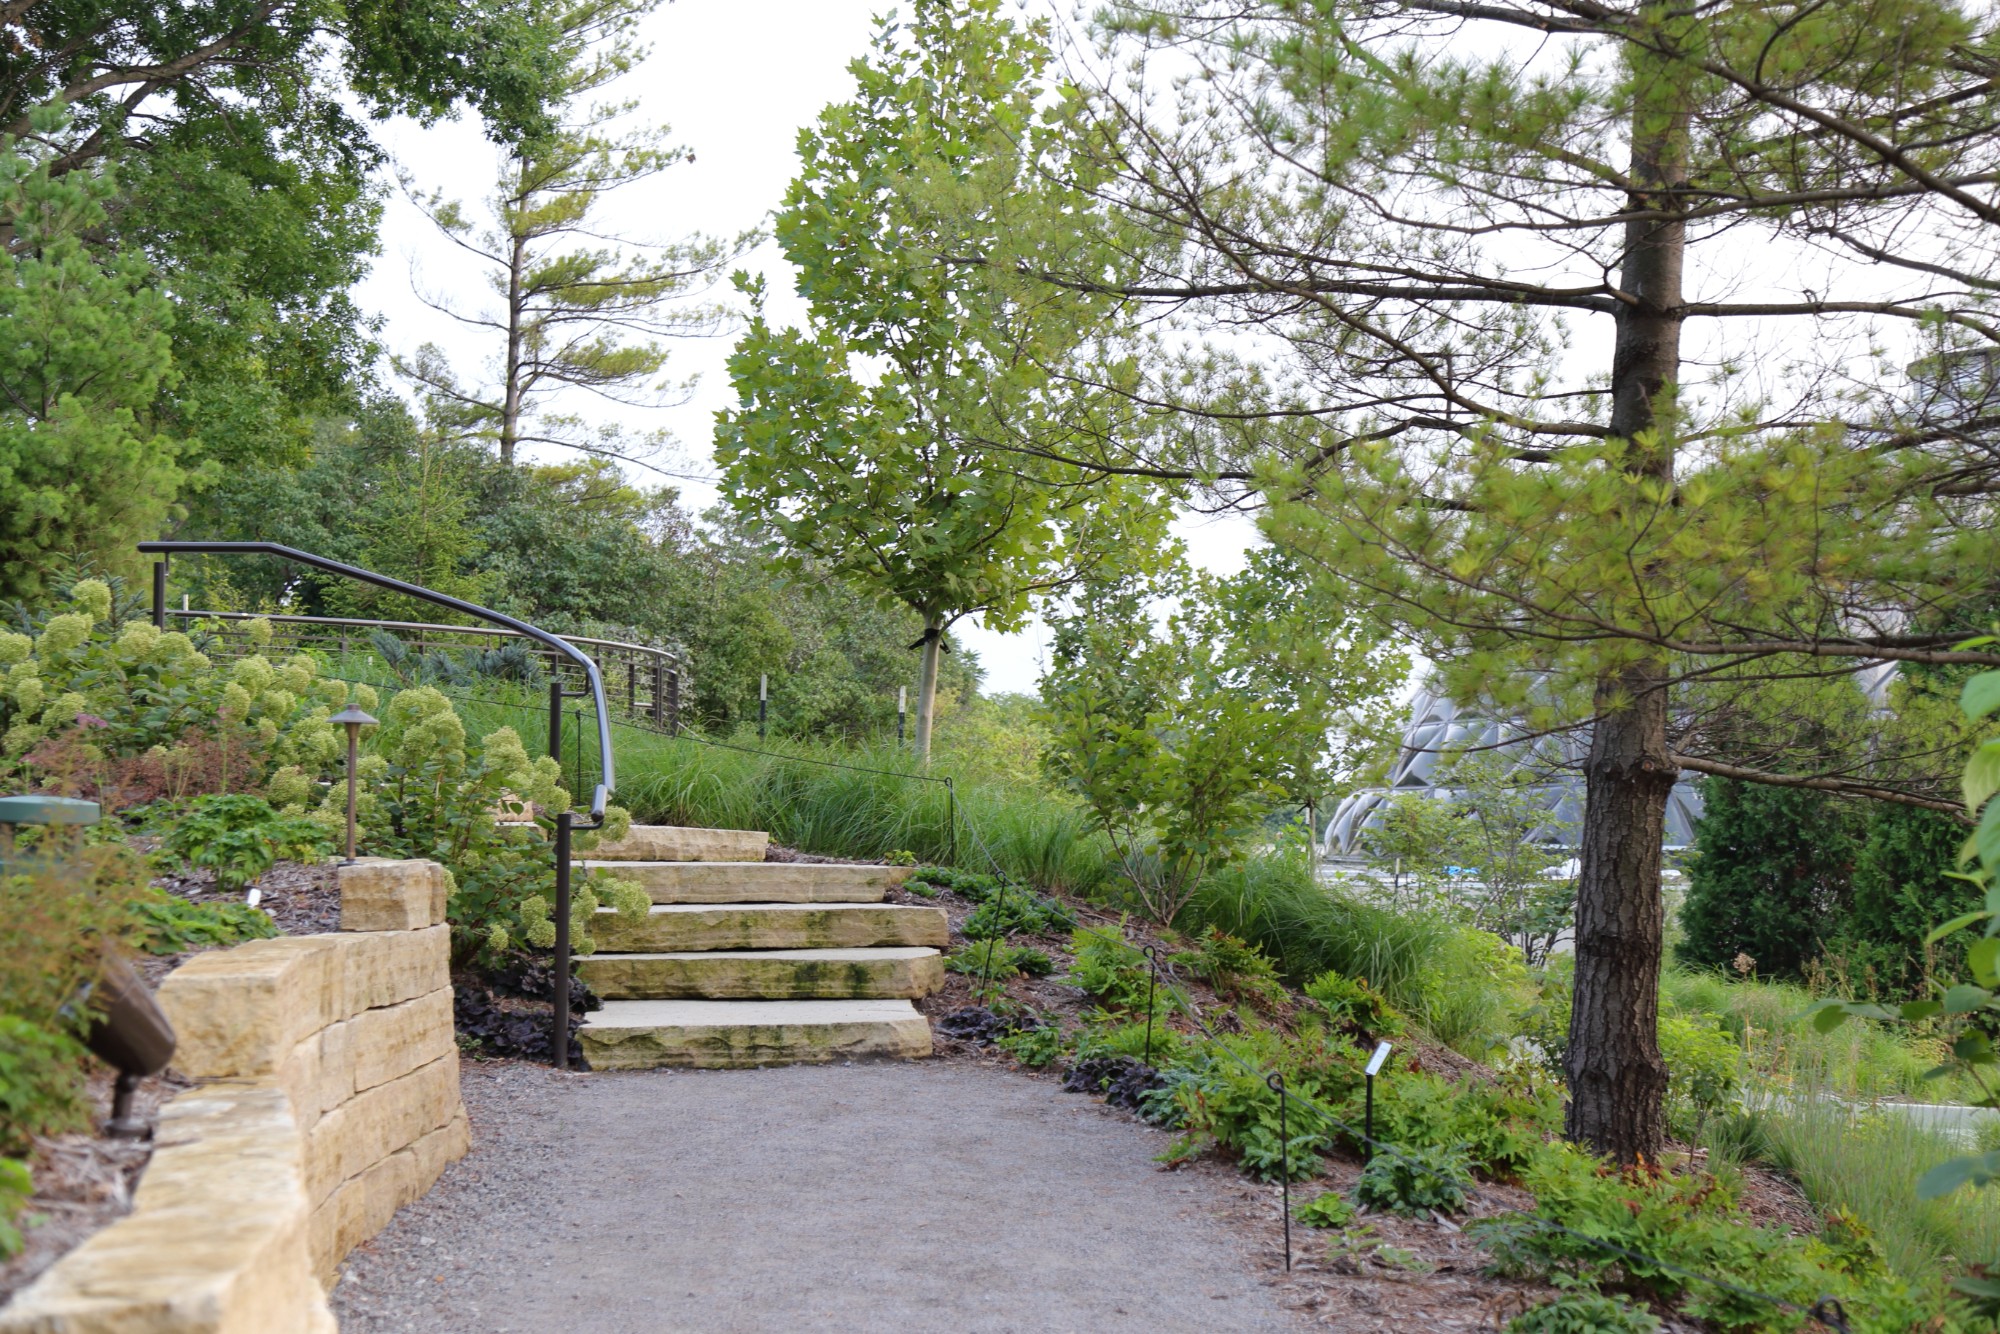 The path leading to the top of the hillside garden on August 30. Photo by Kelly Norris.